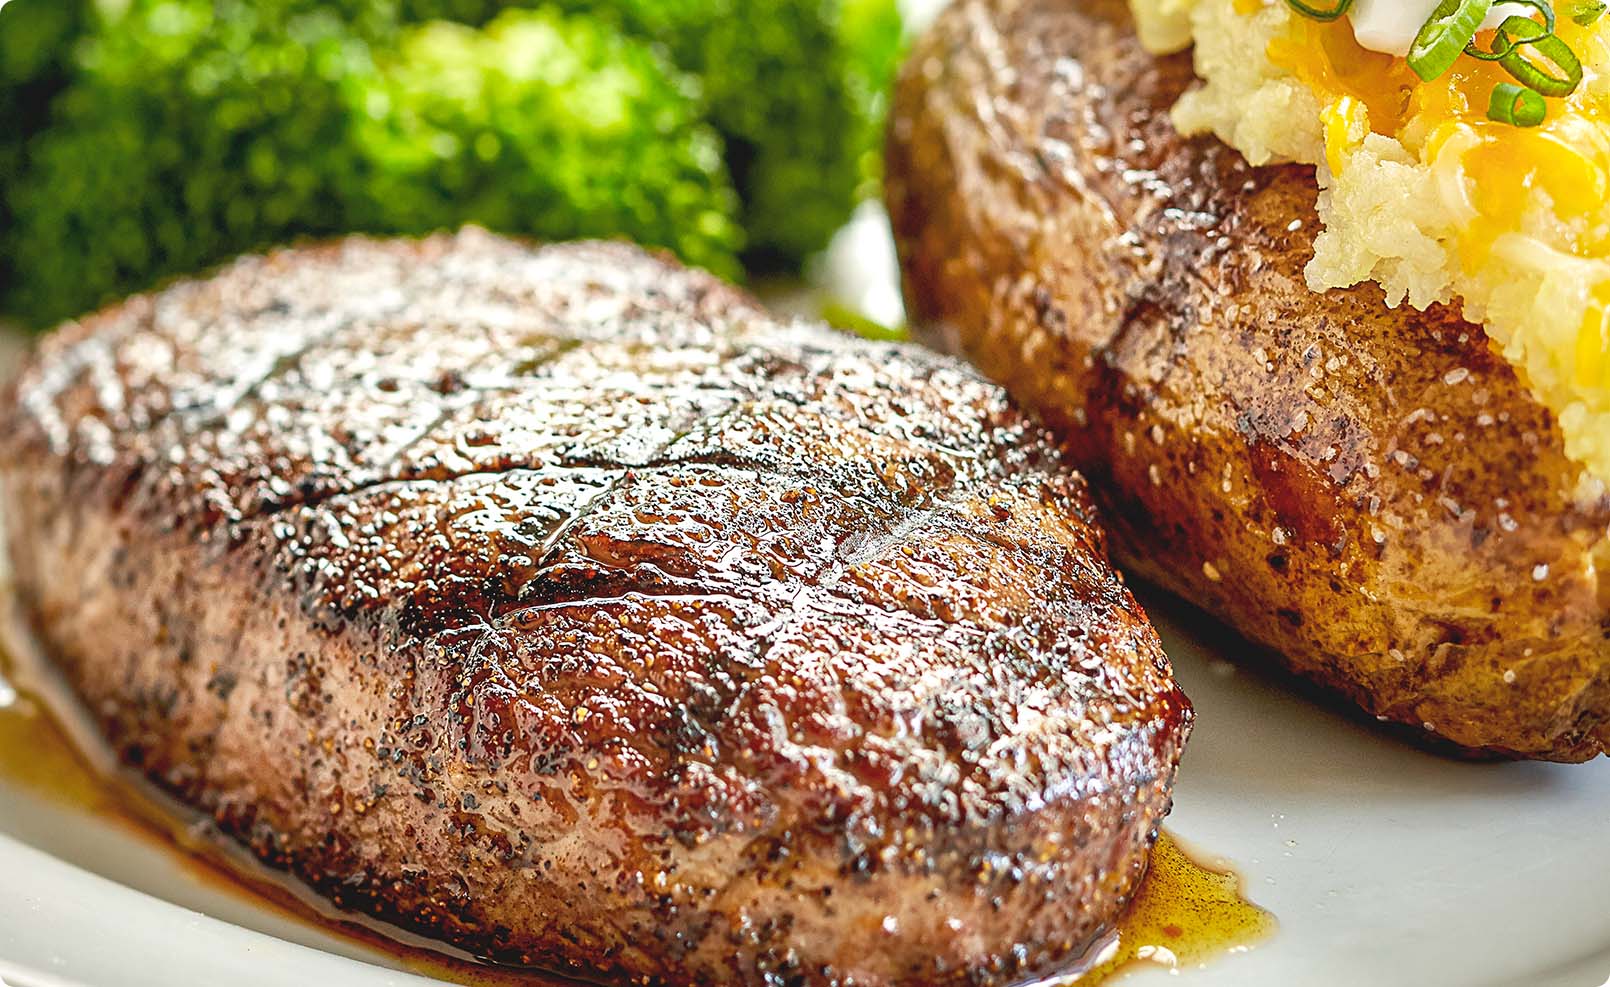 A premium 6oz. cut of fire-grilled sirloin oozing with juicy flavor. Served with broccoli and fluffy mashed potatoes.